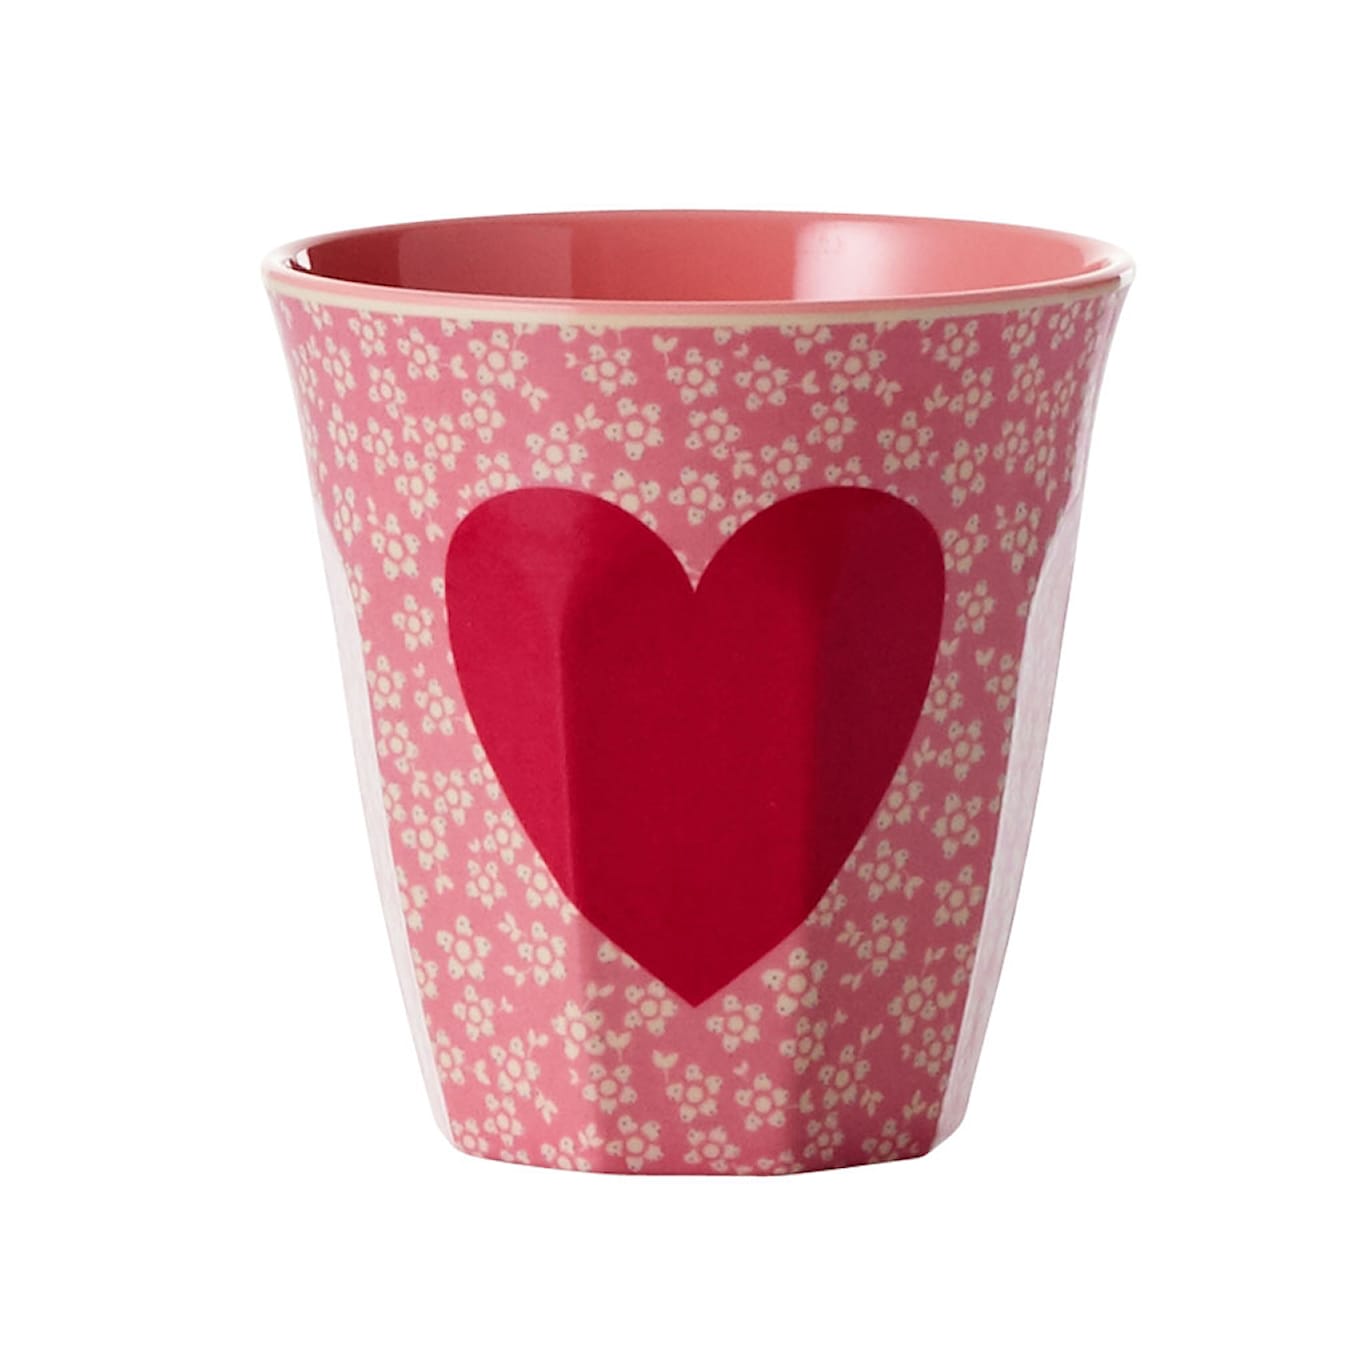 Heart Print Melamine Cup by Rice